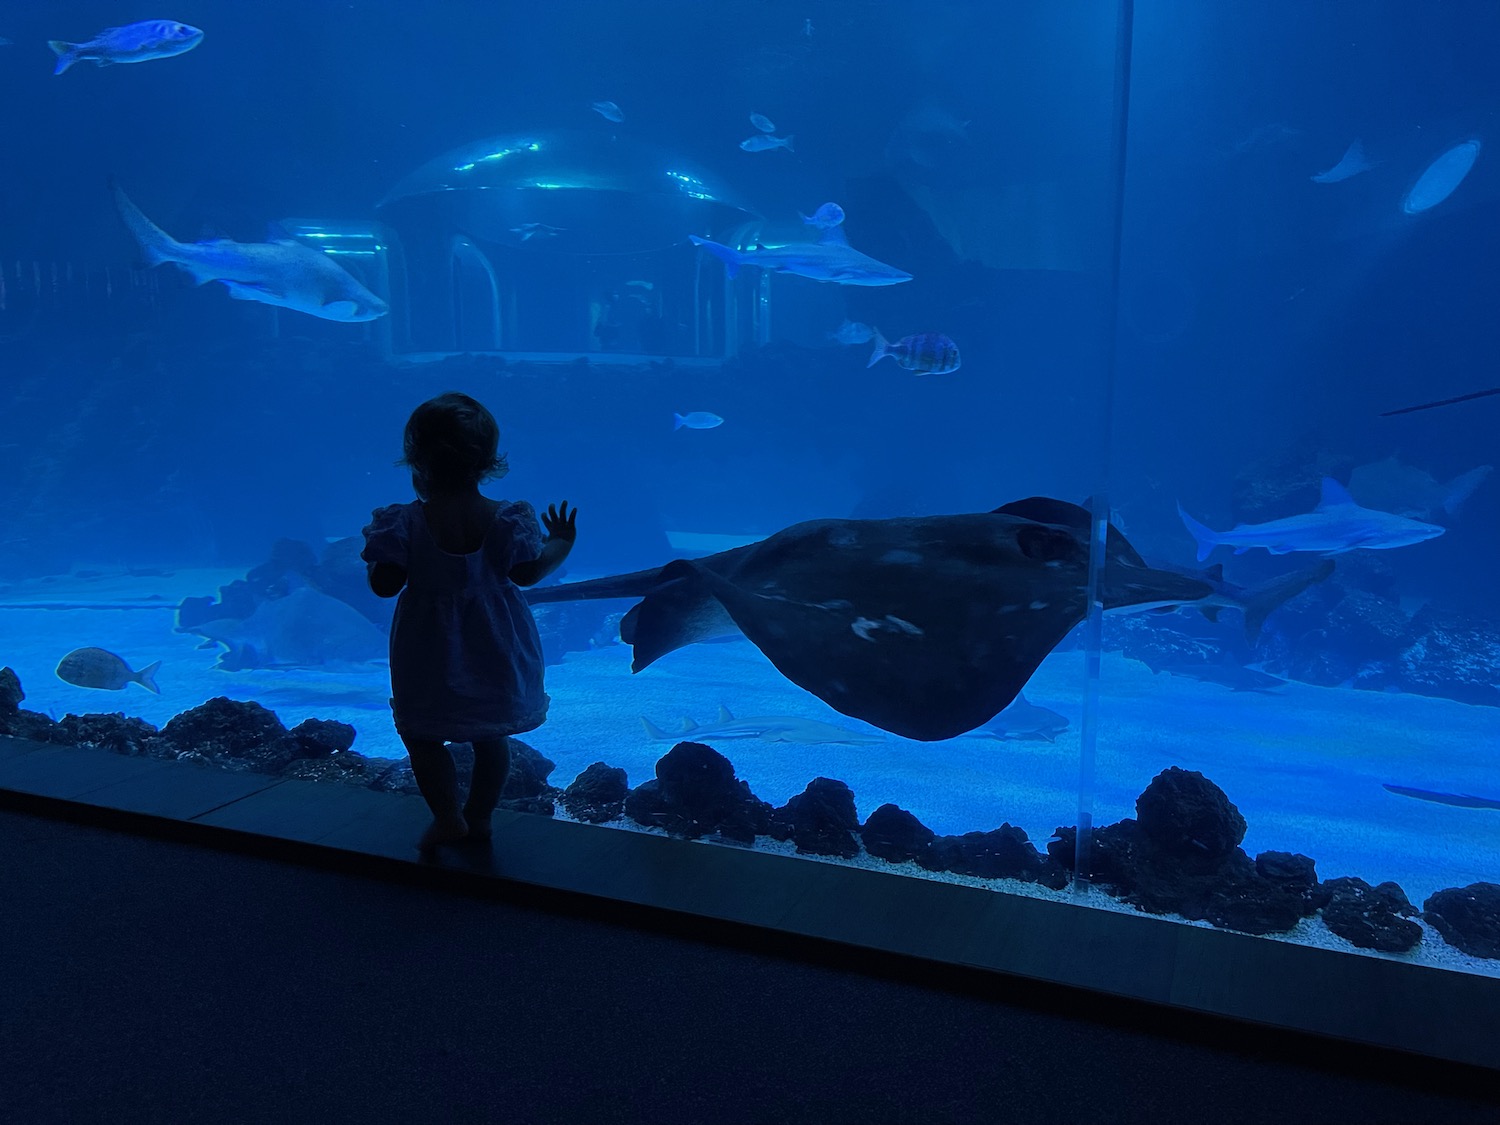 a child standing in front of a large glass tank with fish